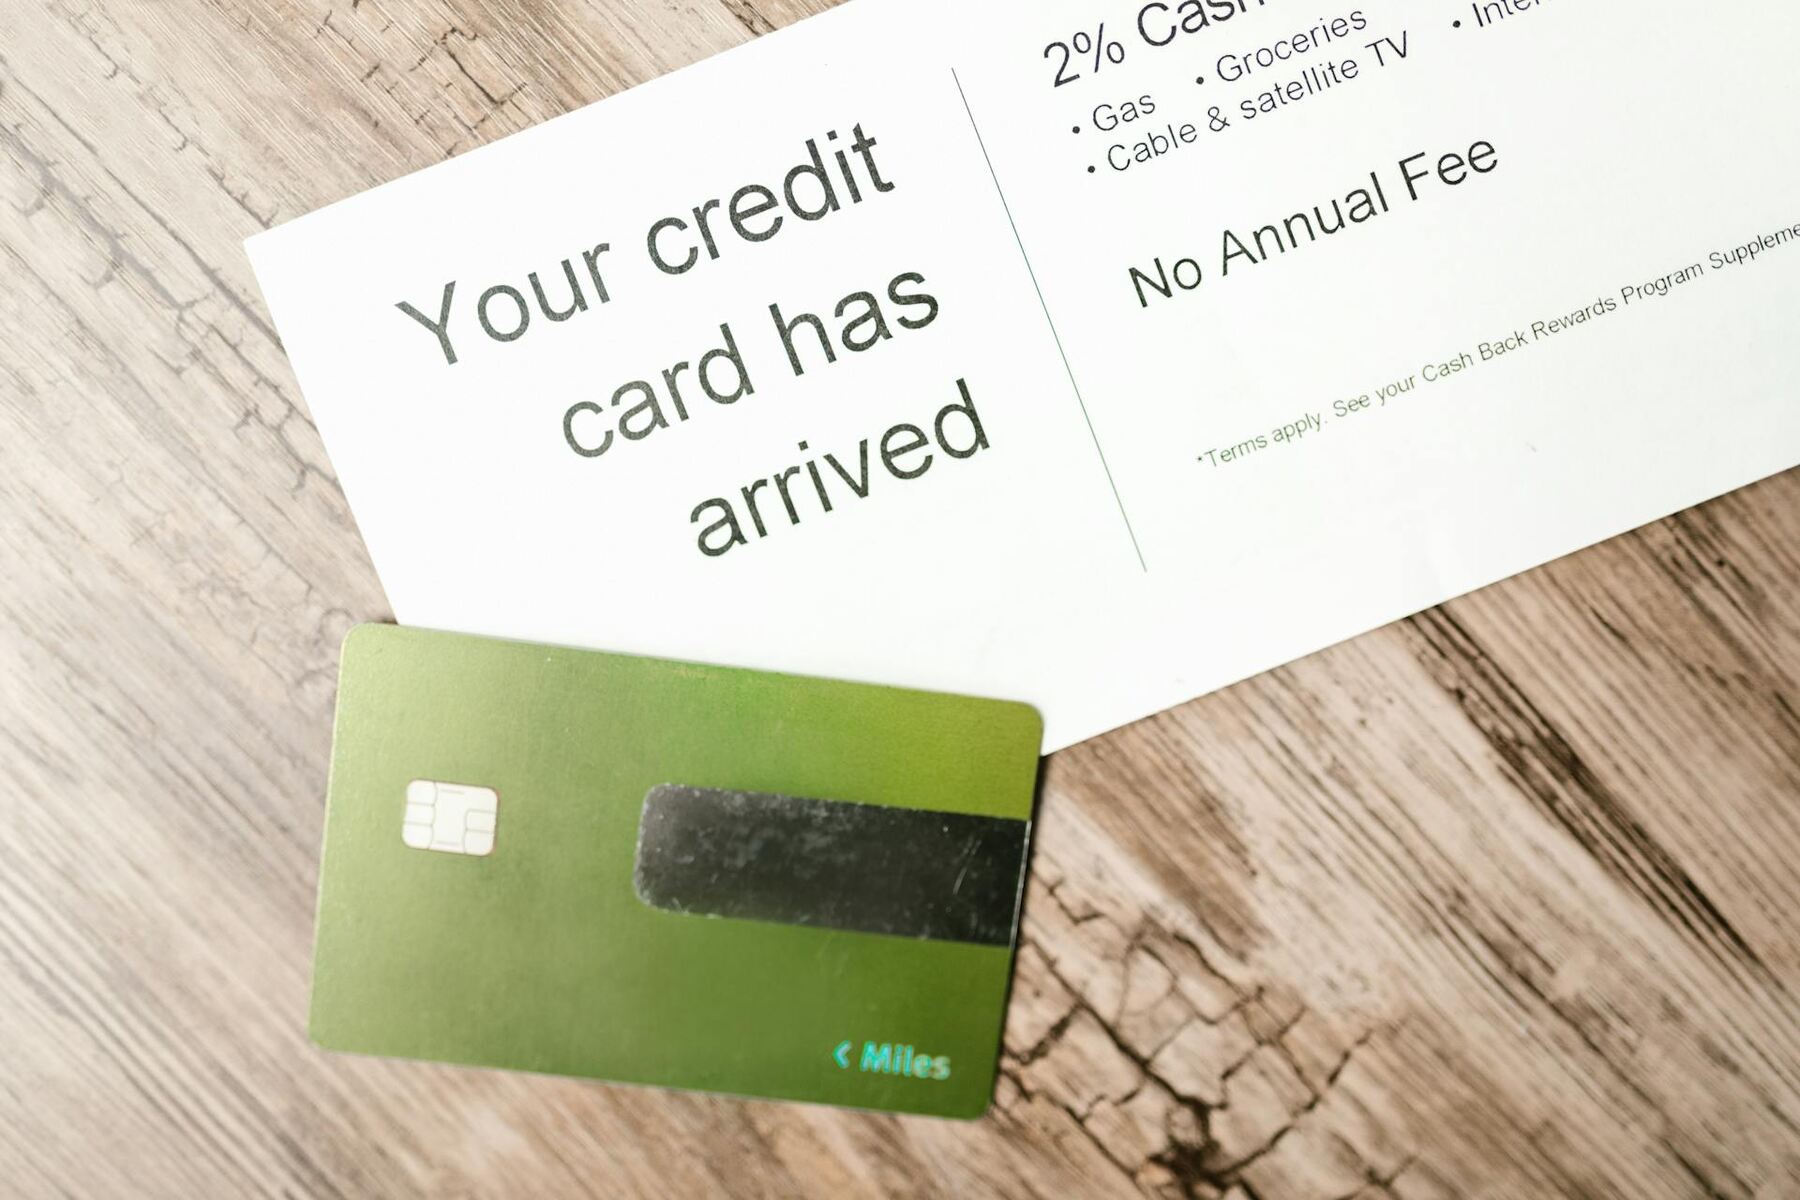 A green credit card beside a welcome letter on a wooden surface